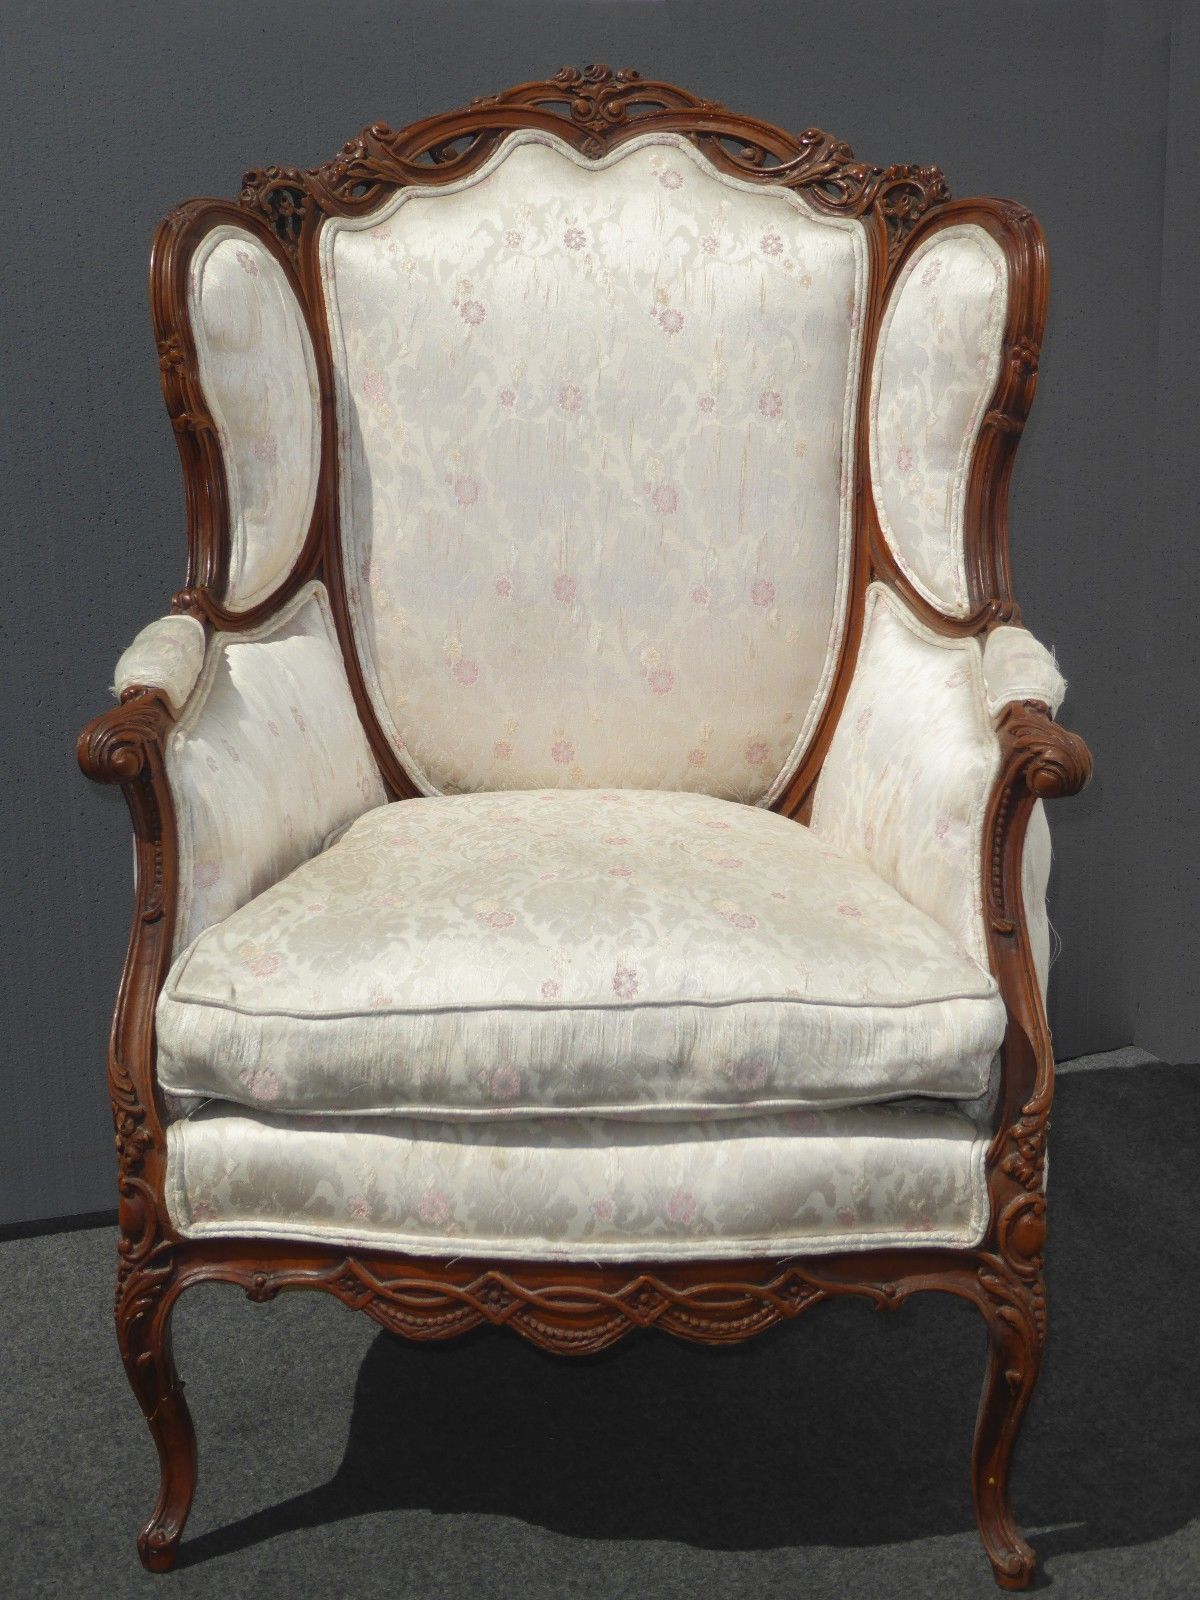 Vintage French Provincial Down Feathers White Arm CHAIR Rococo Louis XVII